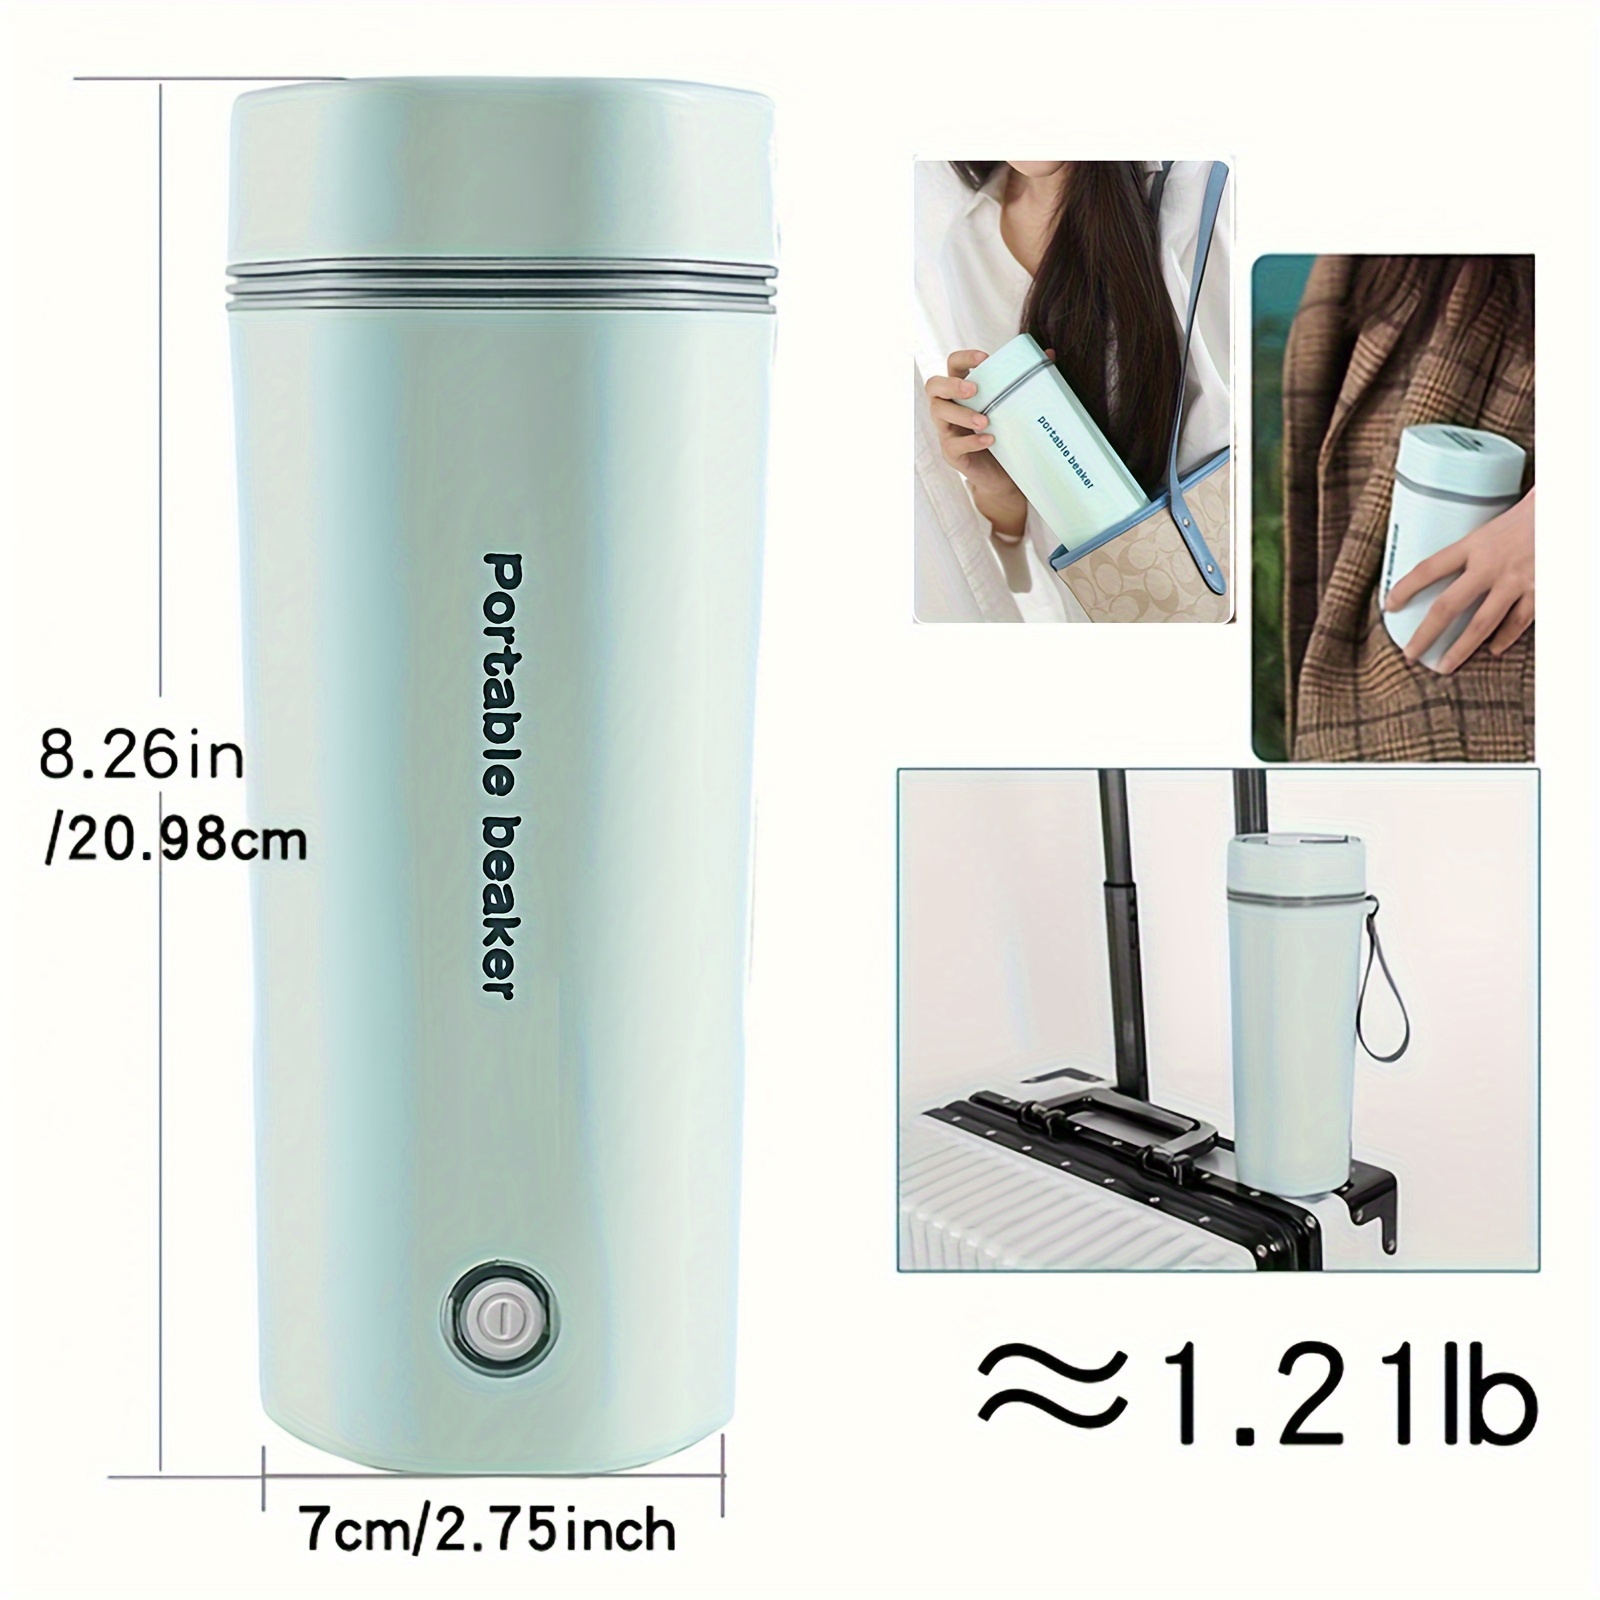  Travel Kettle Electric Small Stainless Steel - Portable Electric  Kettle for Boiling Water - Travel Tea Kettle - Portable Water Boiler - One  Cup Hot Water Maker - 350ml Travel Electric